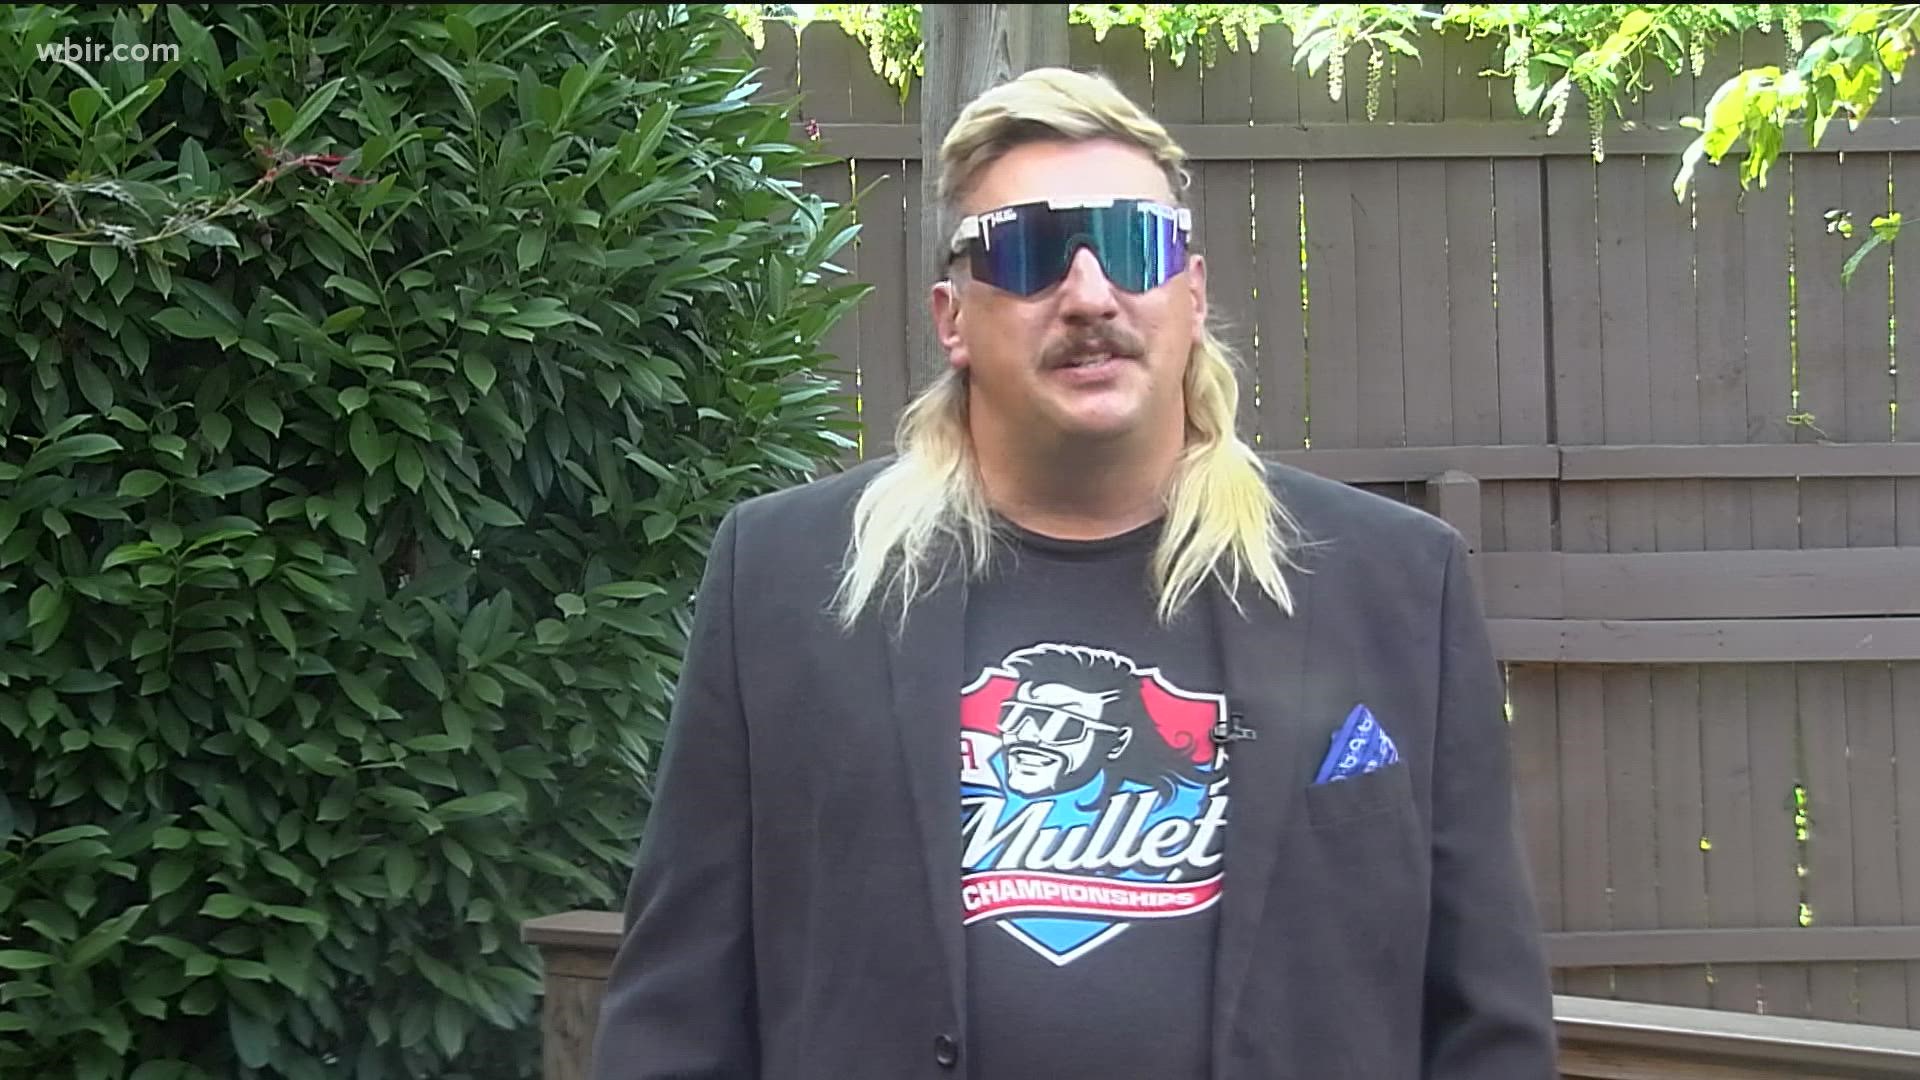 Knoxville native Clinton Duncan made it to the finals in the USA Mullet competition.